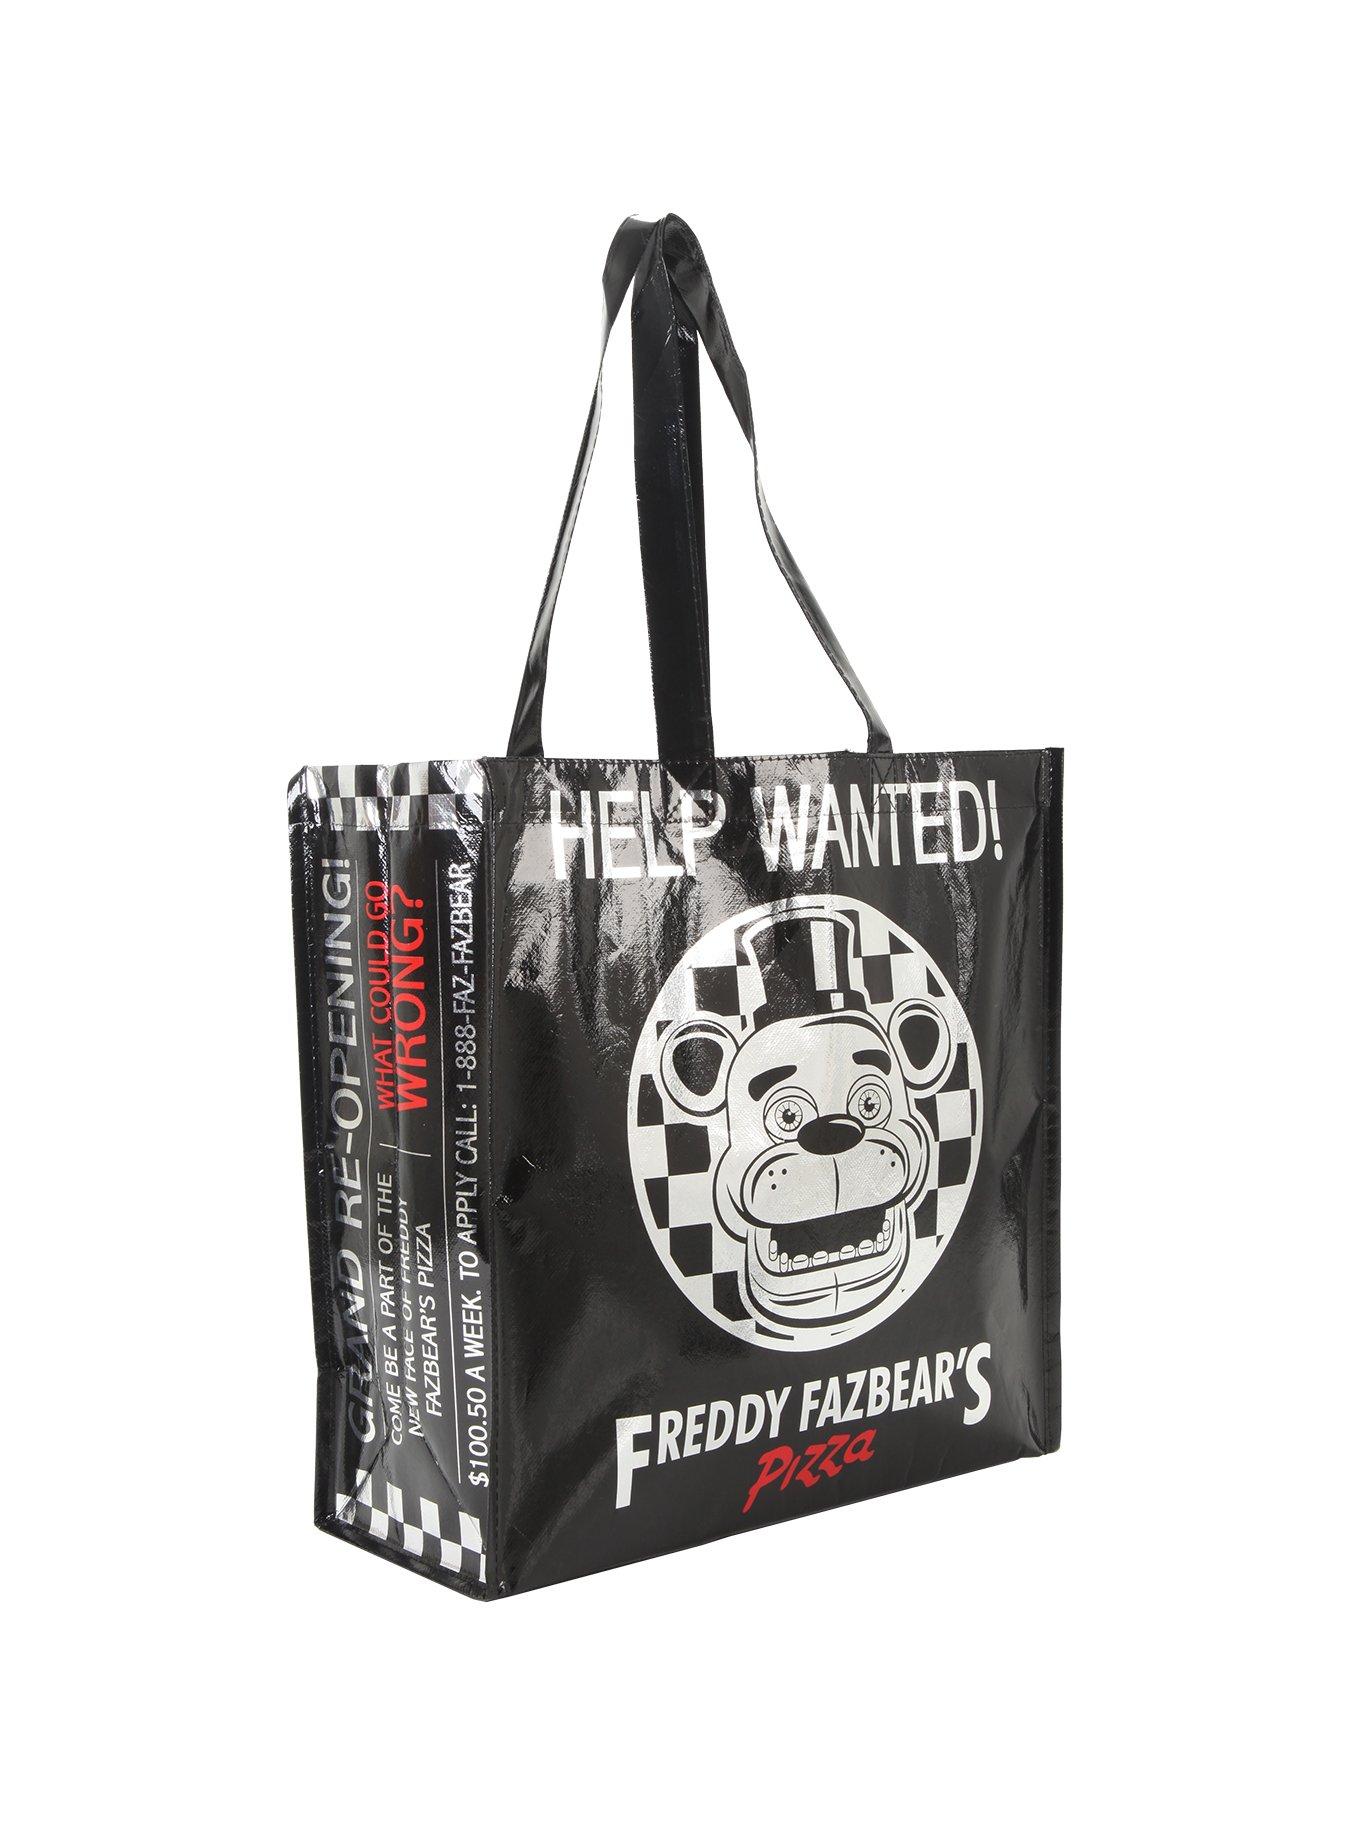 Five Nights at Freddy's Favor Bag / Thank You (Instant Download